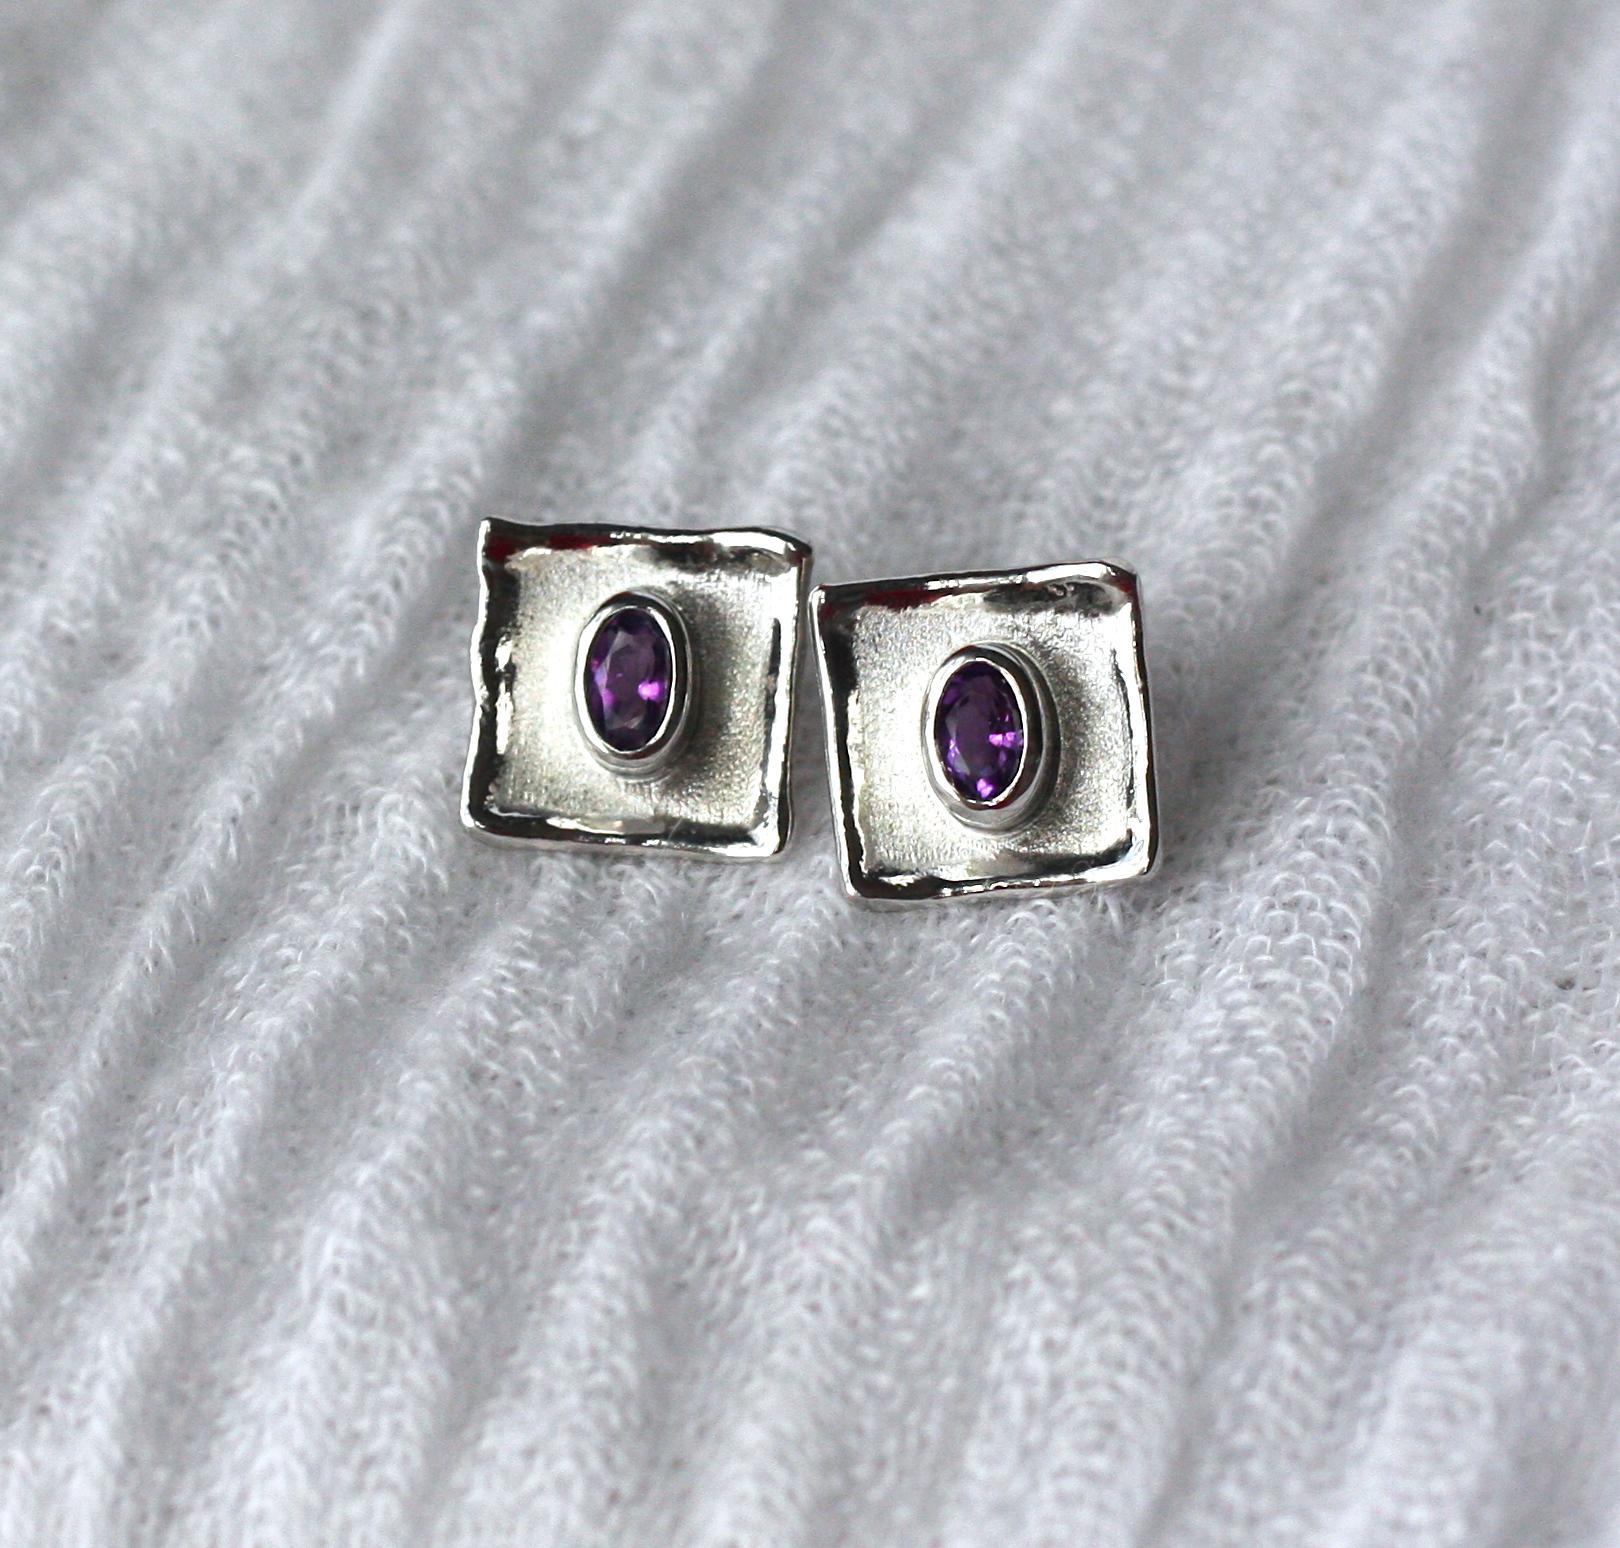 These fine silver and palladium plated Yianni Creations stud earrings from Ammos Collection are all handmade in Greece in our workshop. They are smaller size studs with a big effect. The square shape complements the 0.45 Carat oval Amethysts and